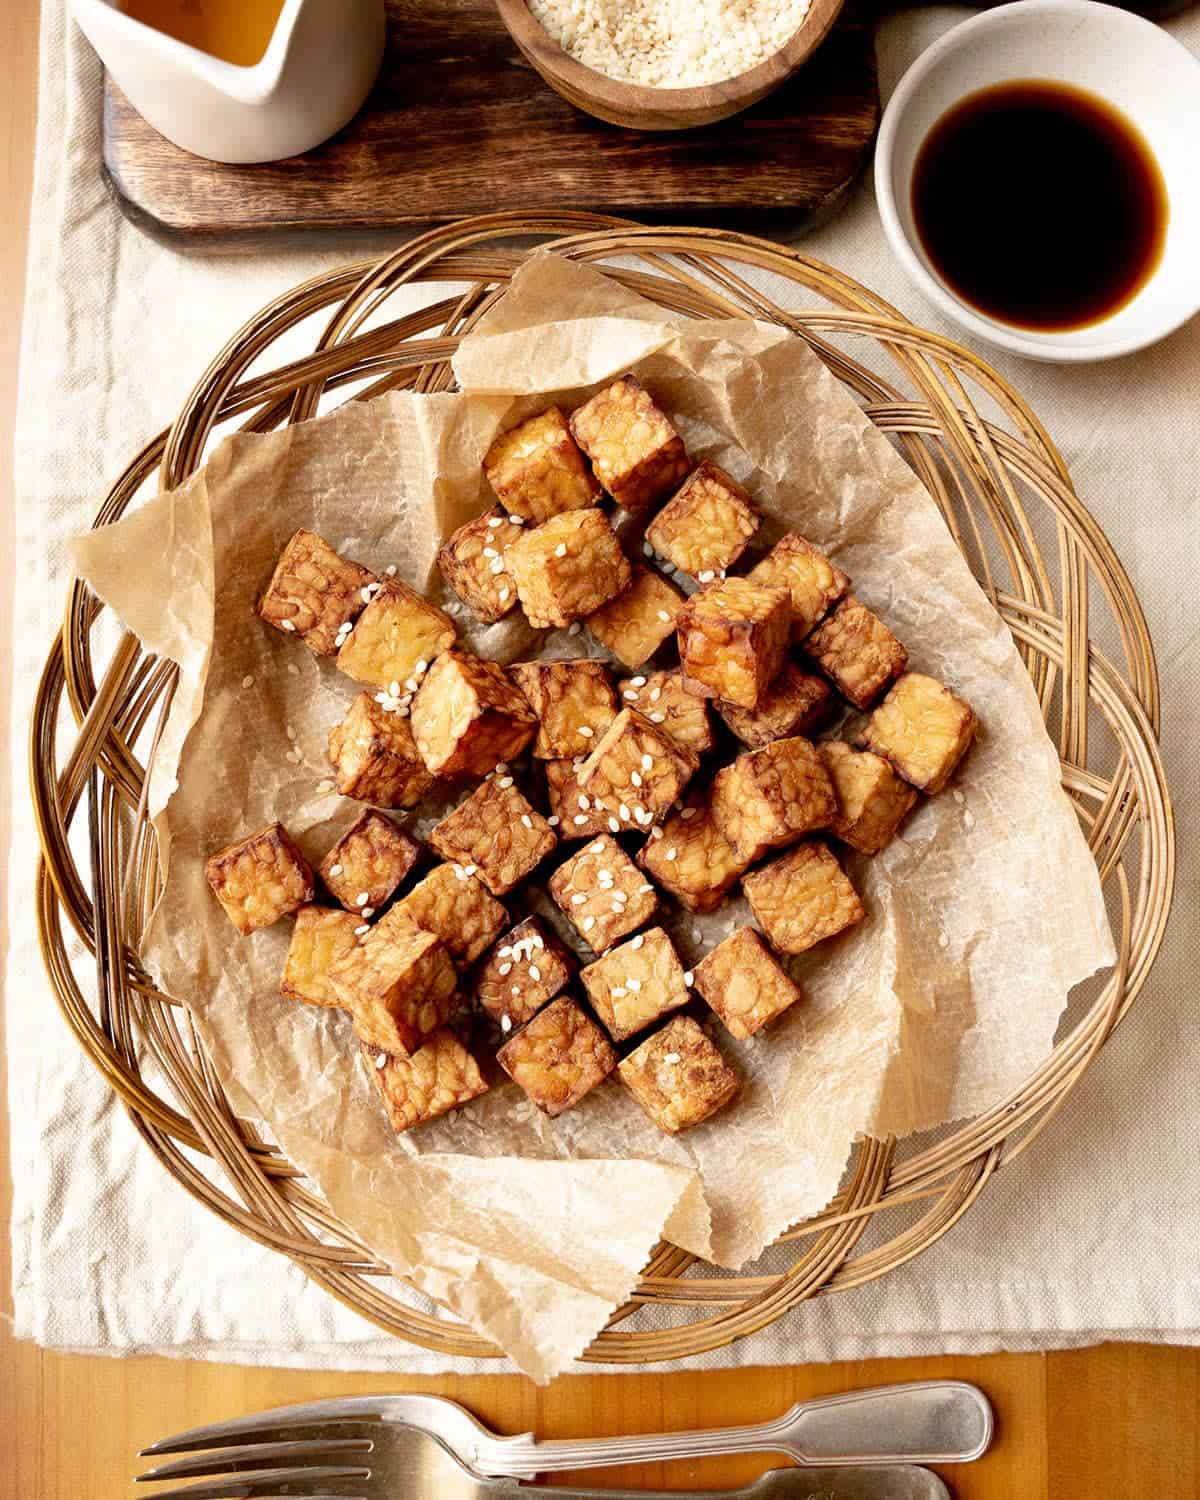 Tempeh chinks in a wicker basket with soy sauce and sesame seeds in small bowls.